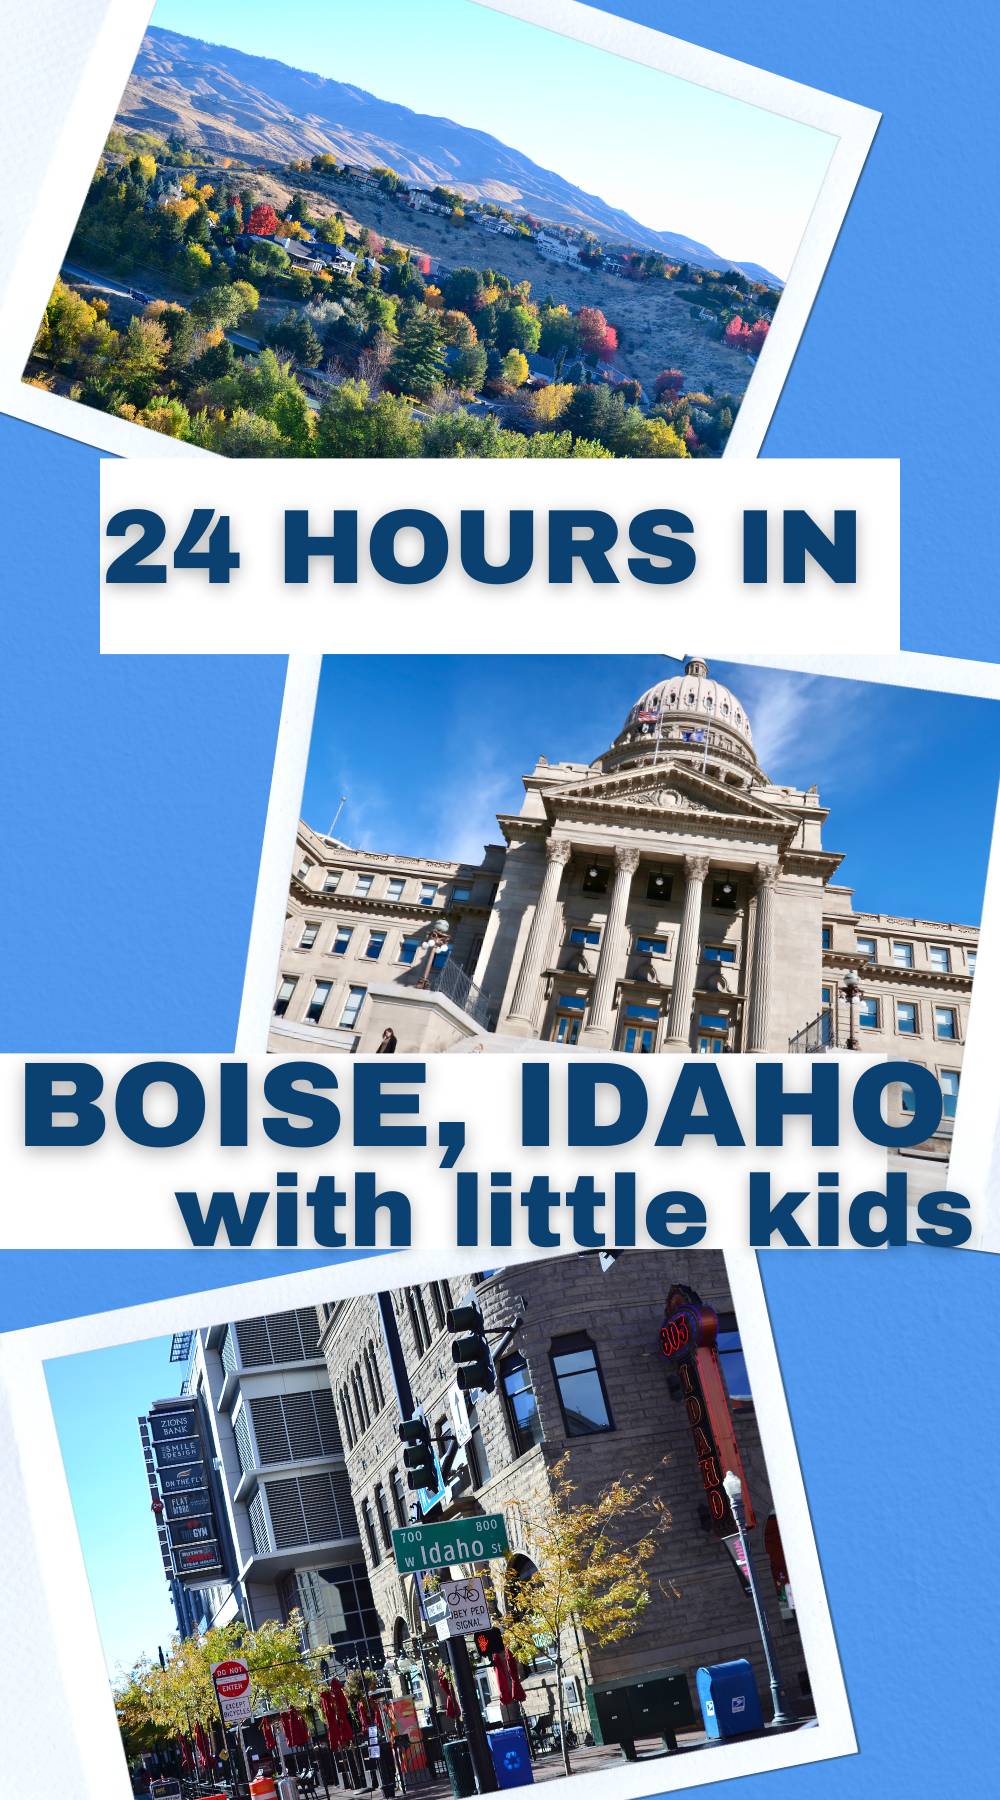 24 hours in boise idaho with little kids.png